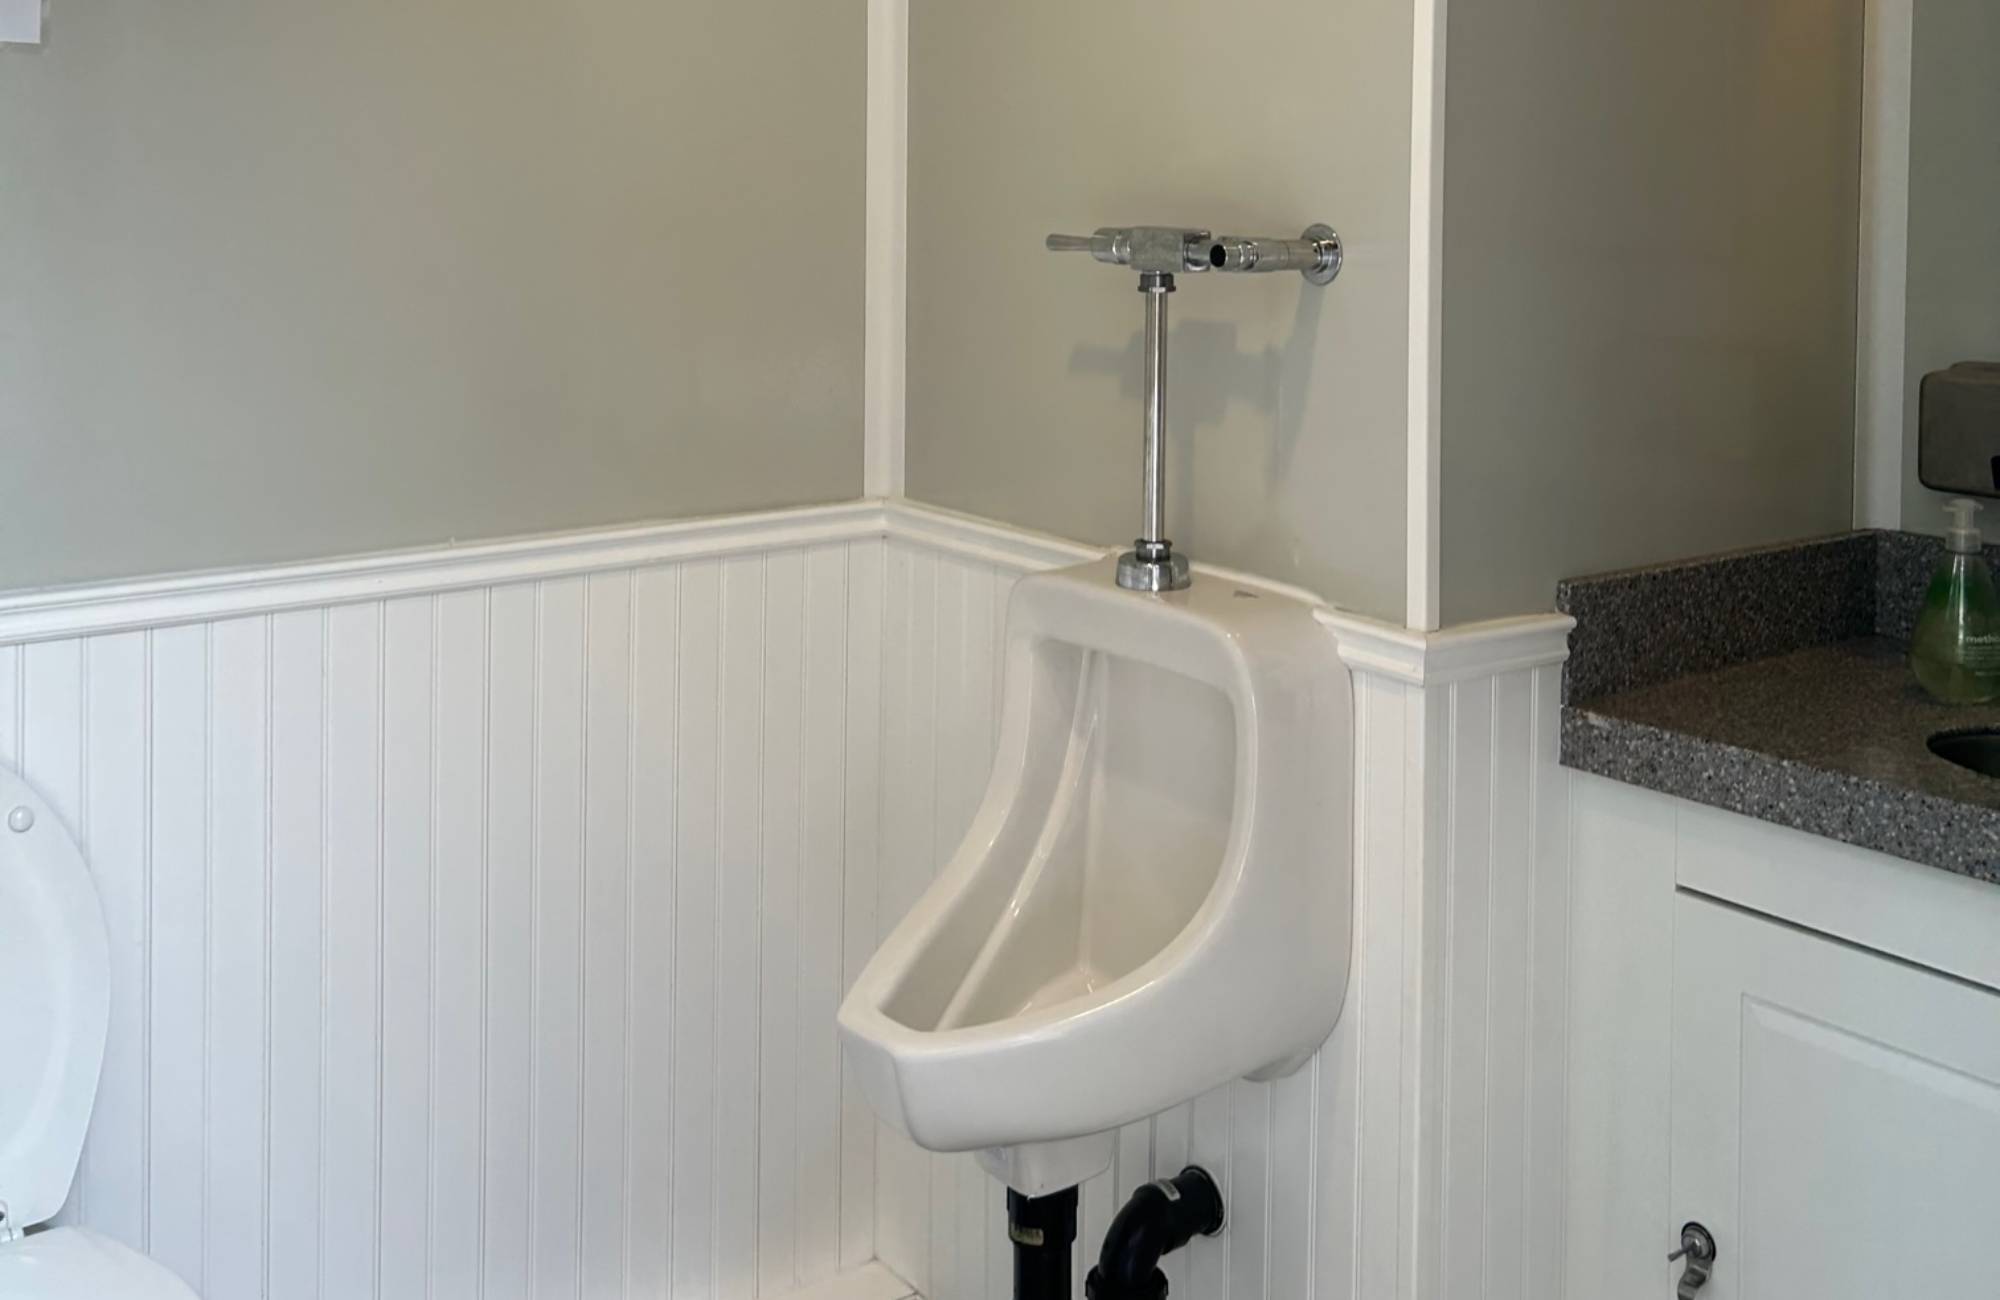 Keeping Costs Low: Finding Affordable Construction Site Washrooms